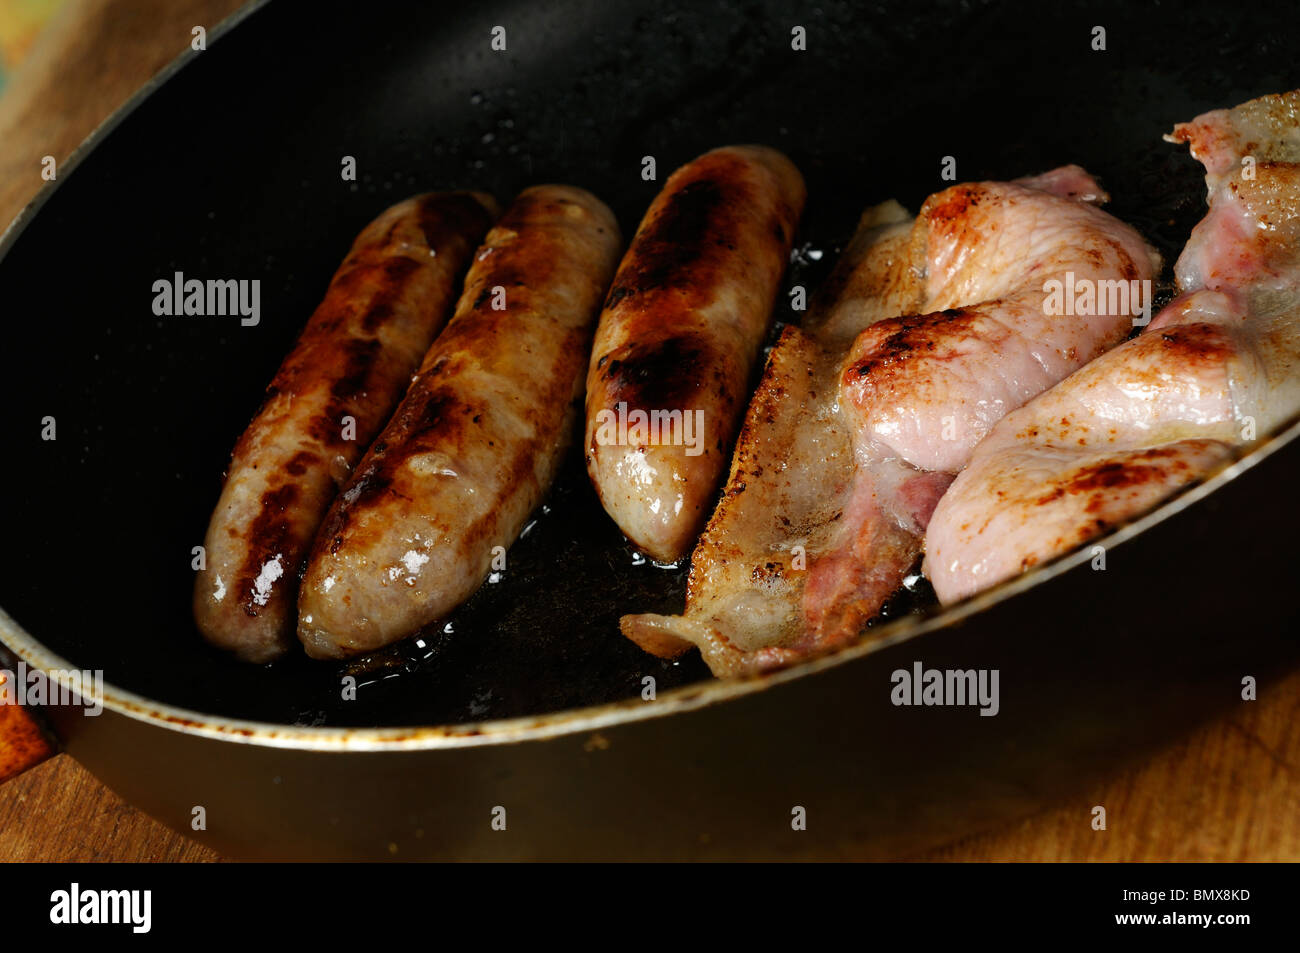 Stock photo of bacon and sausages cooking in a frying pan. Stock Photo